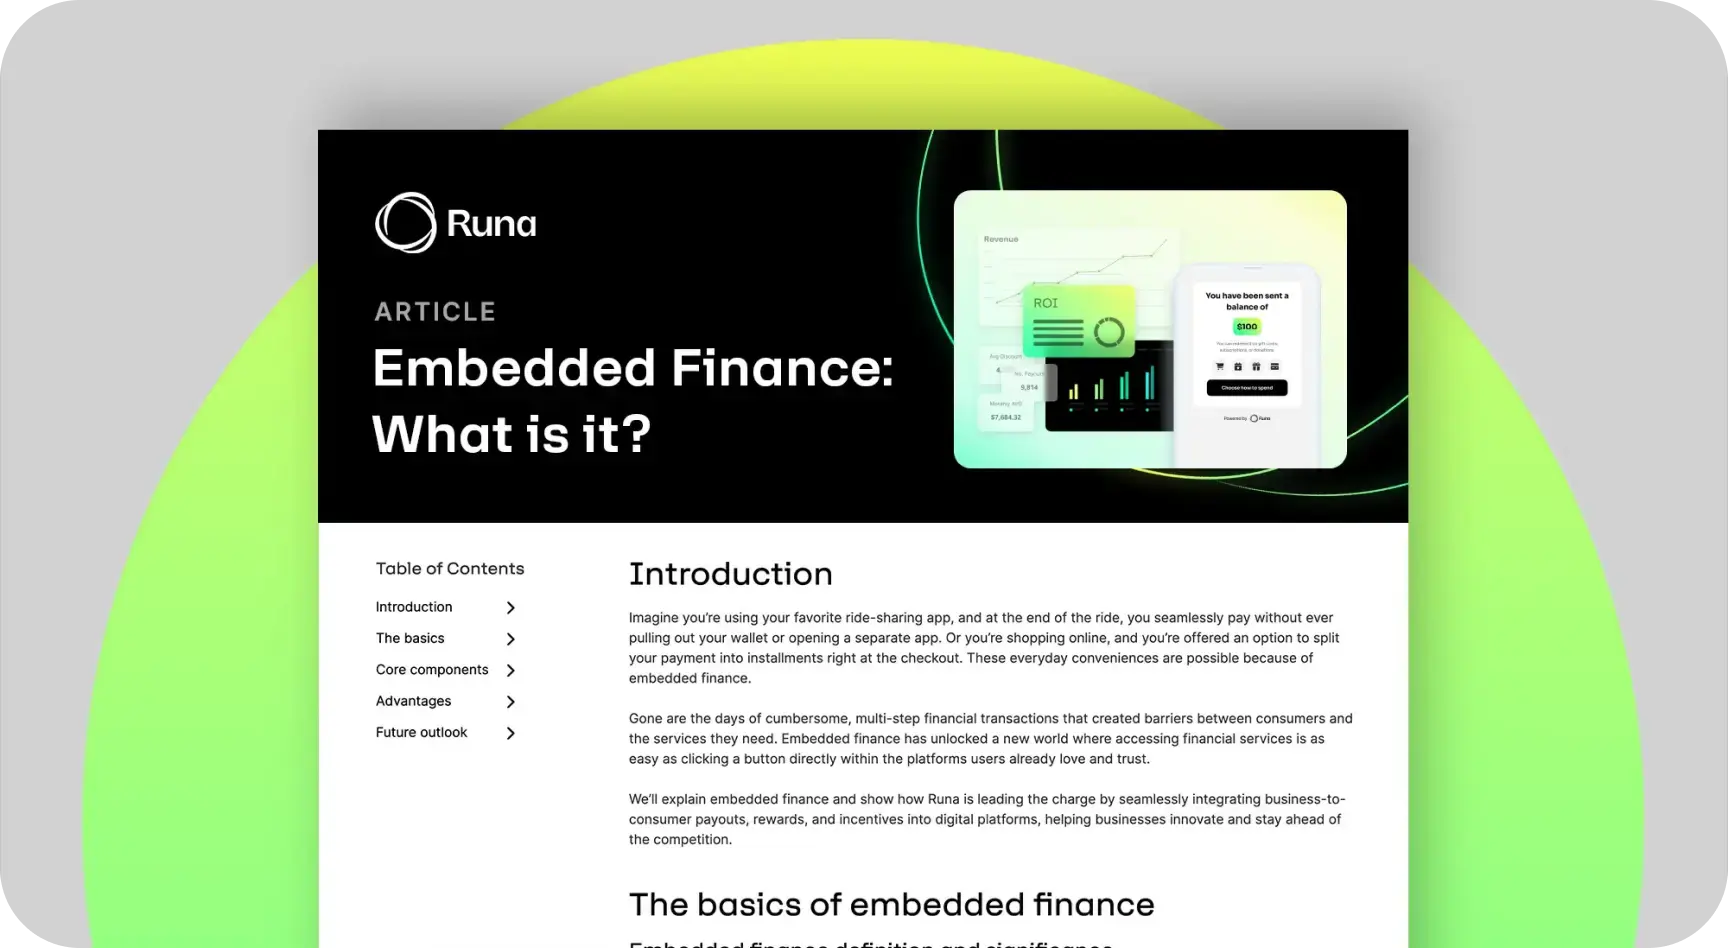 Guide: Embedded Finance: What is It?